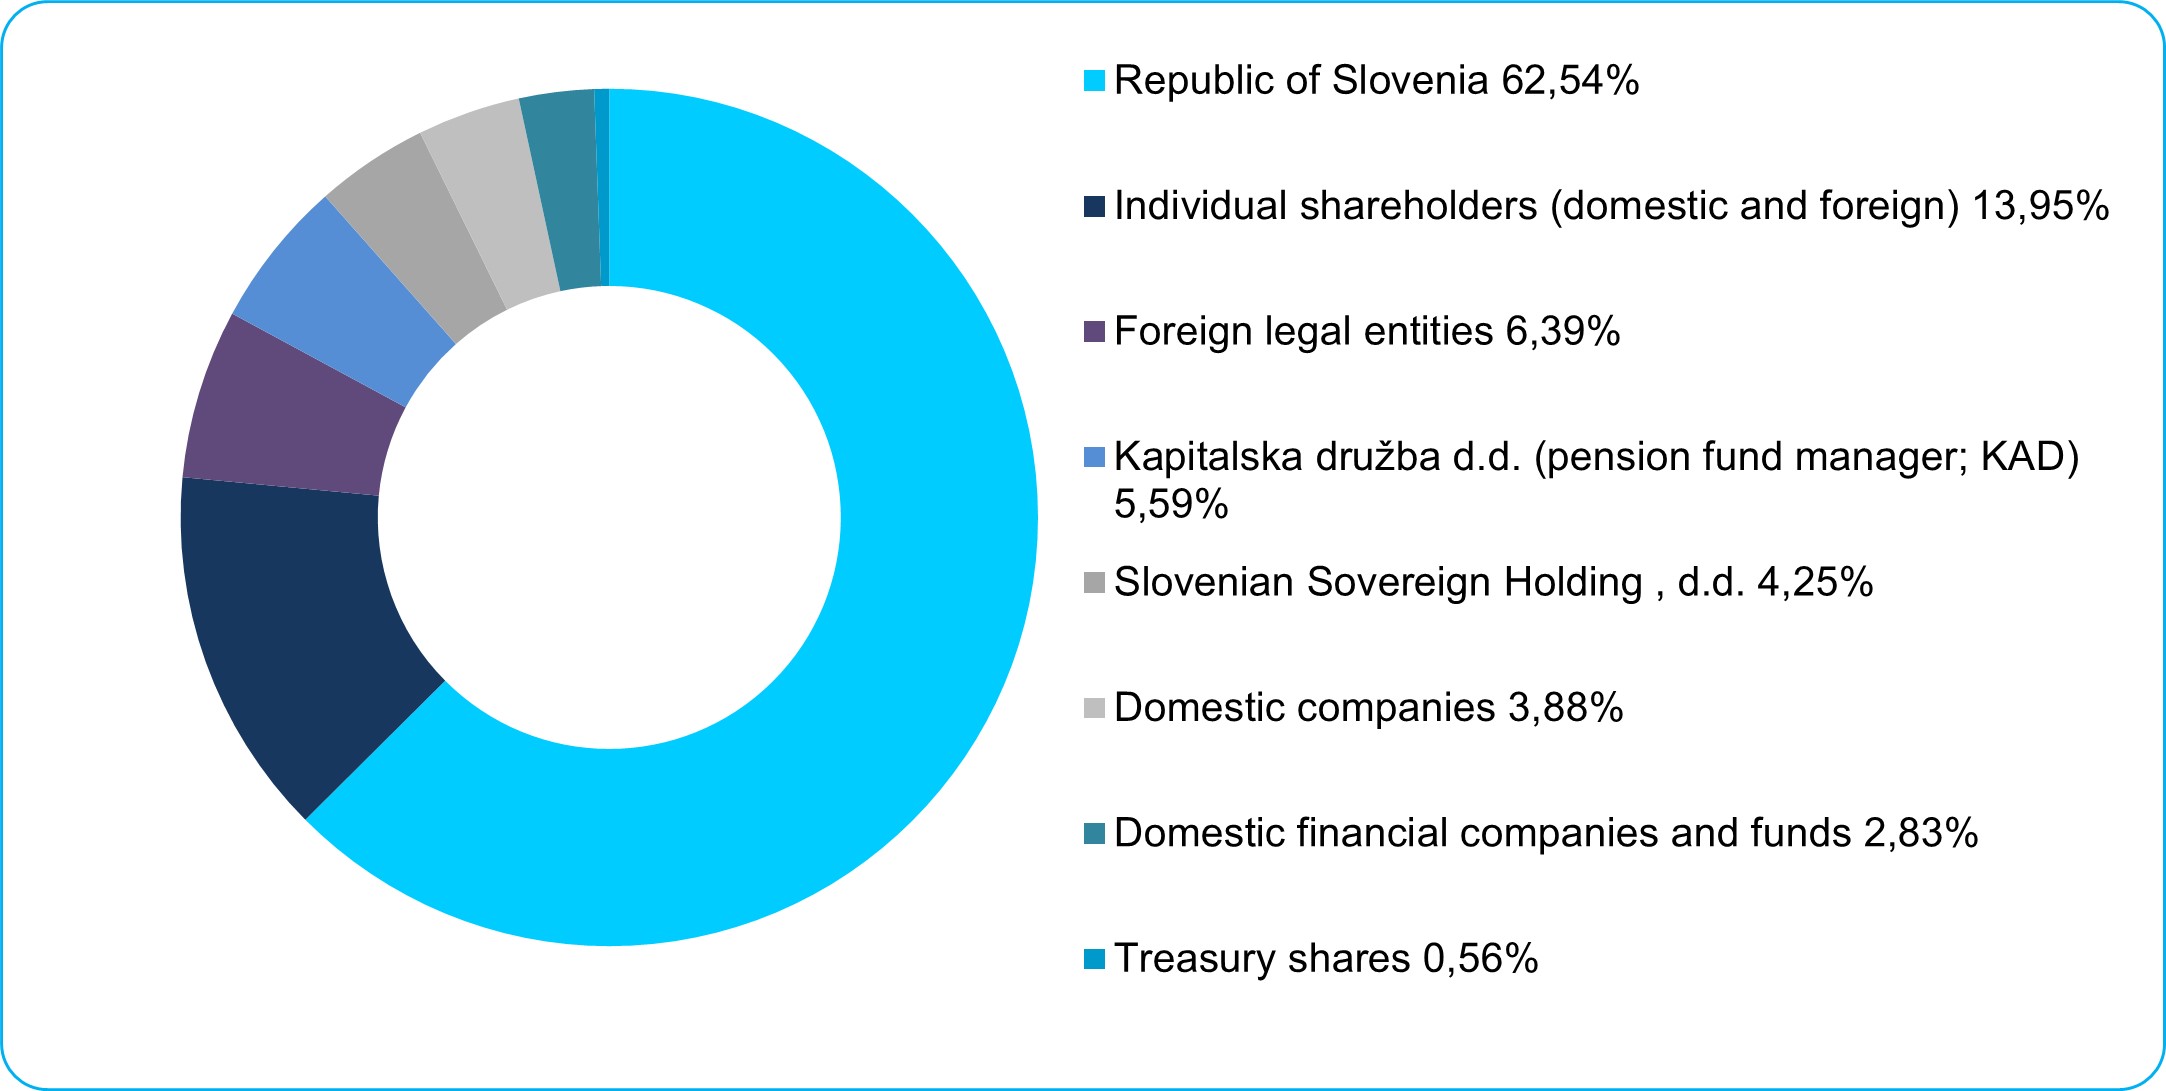 Ownership structure